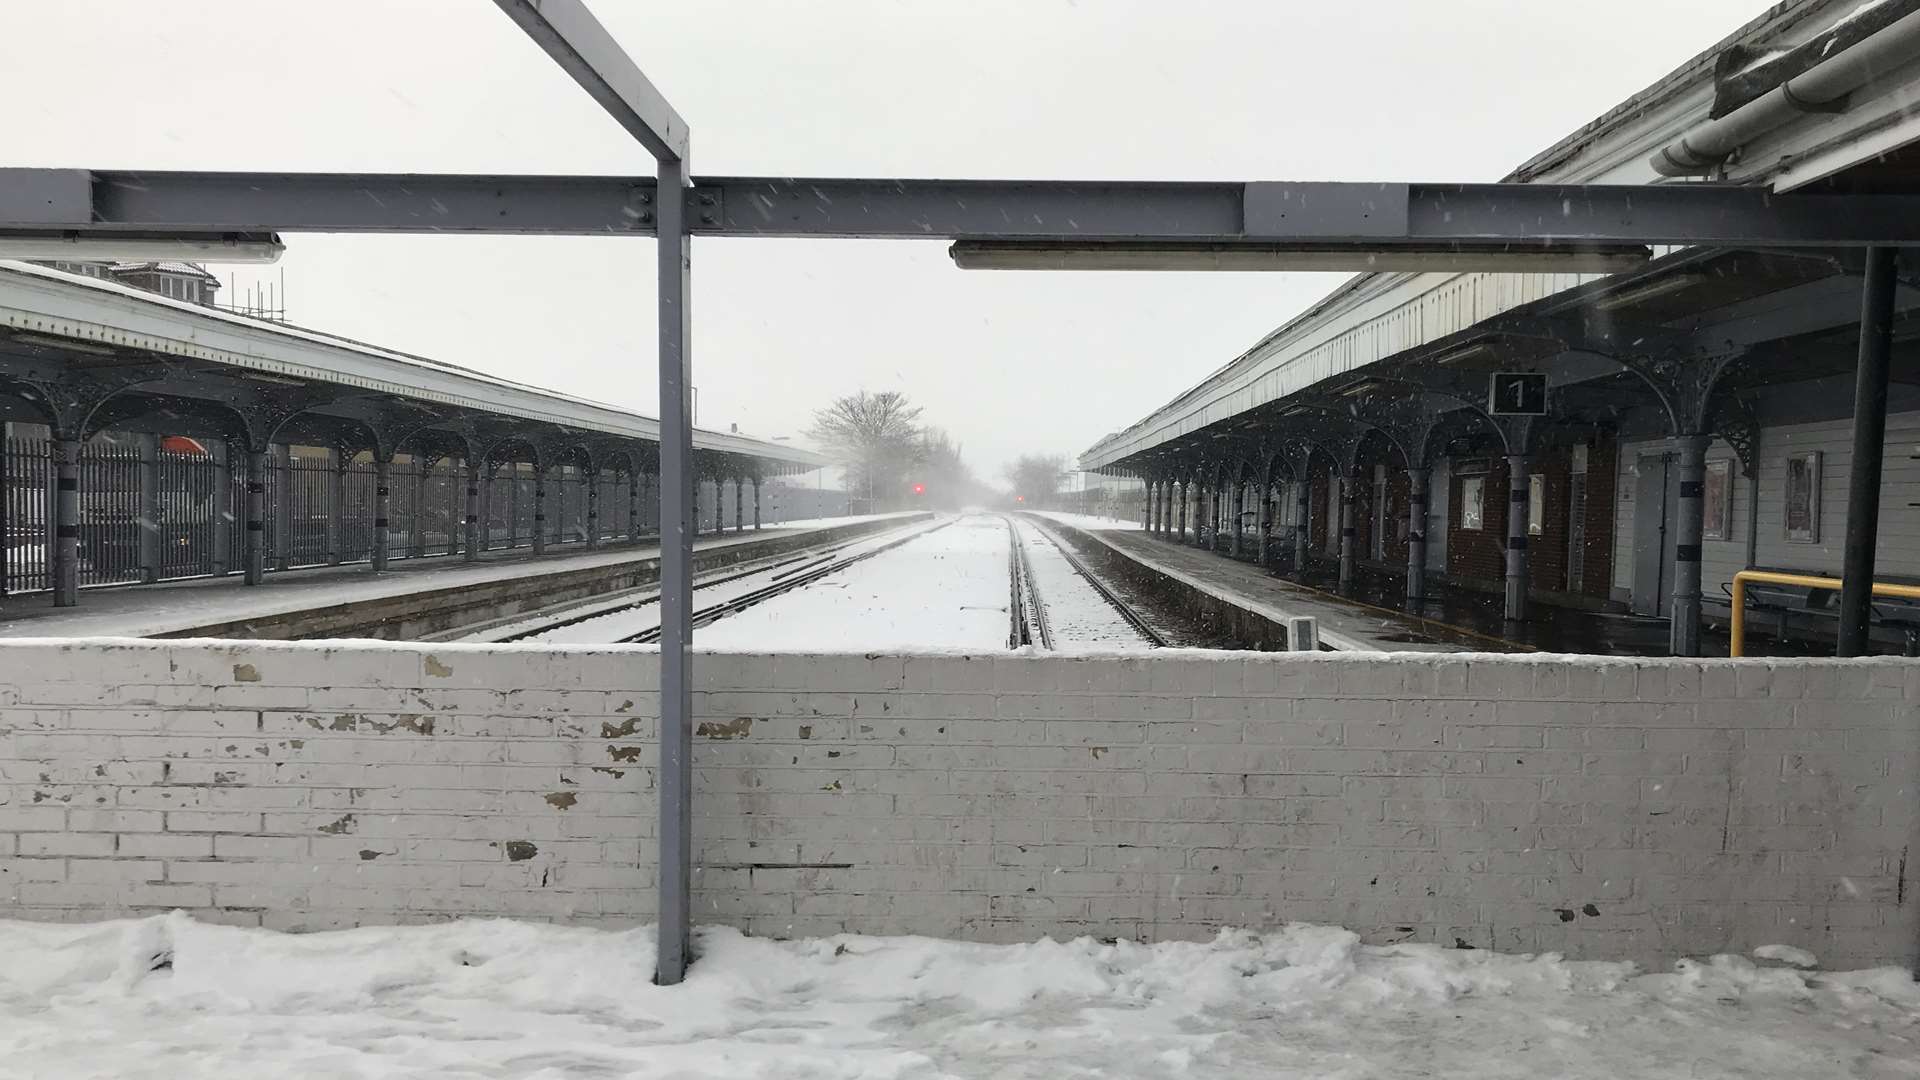 A deserted Sheerness Railway Station